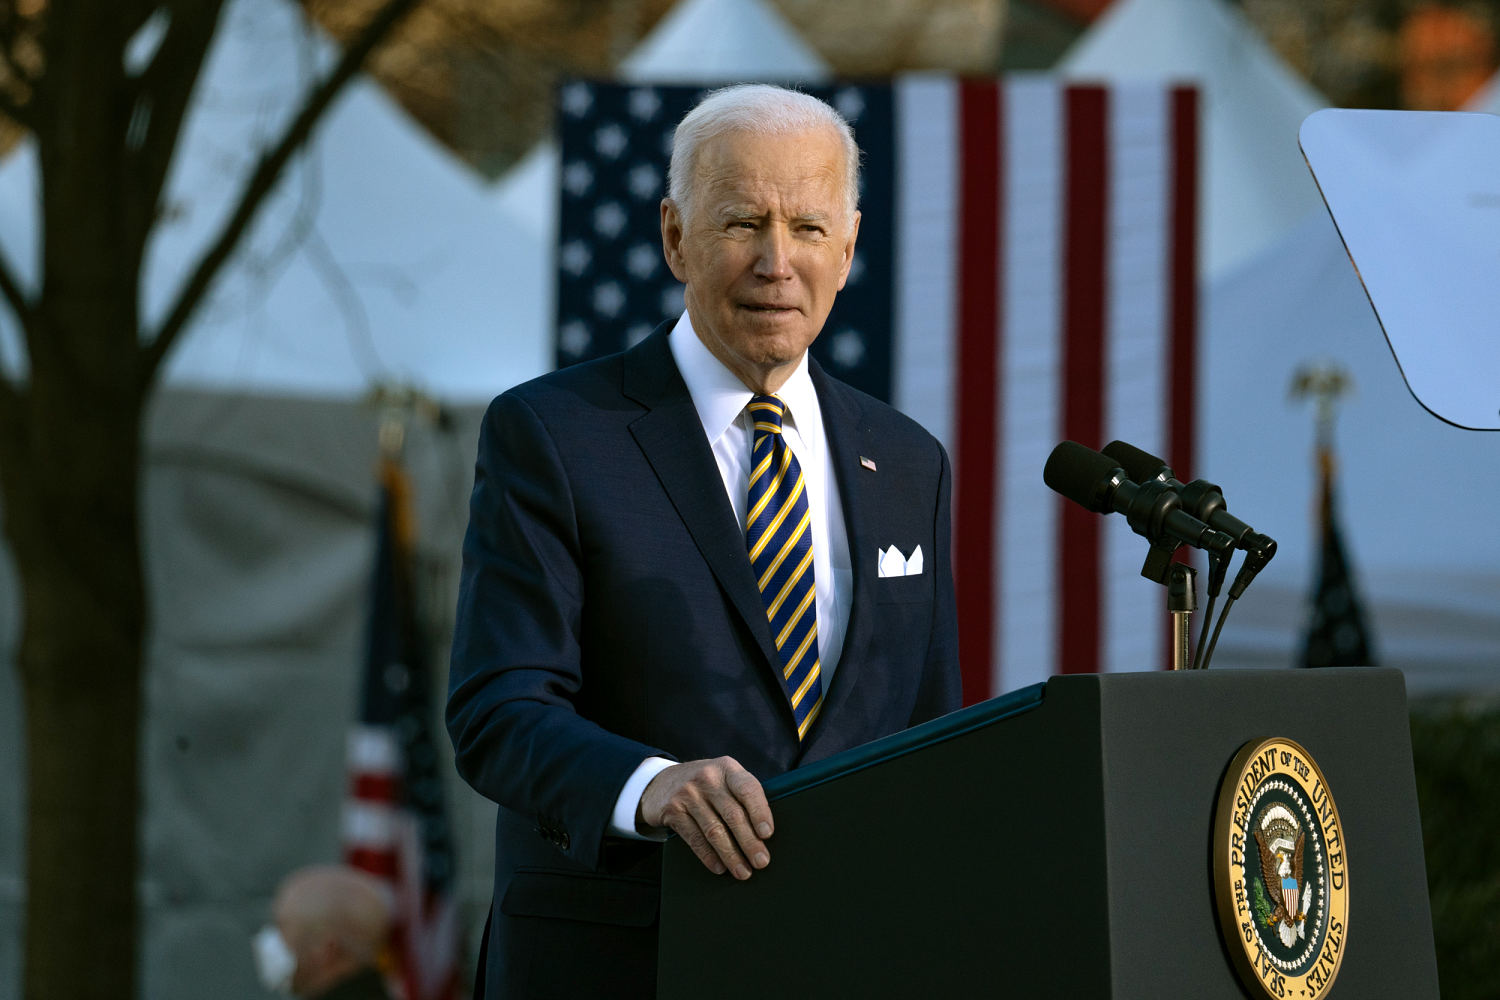 Morehouse faculty vote 50-38 to award Biden an honorary doctorate, with about a dozen abstaining